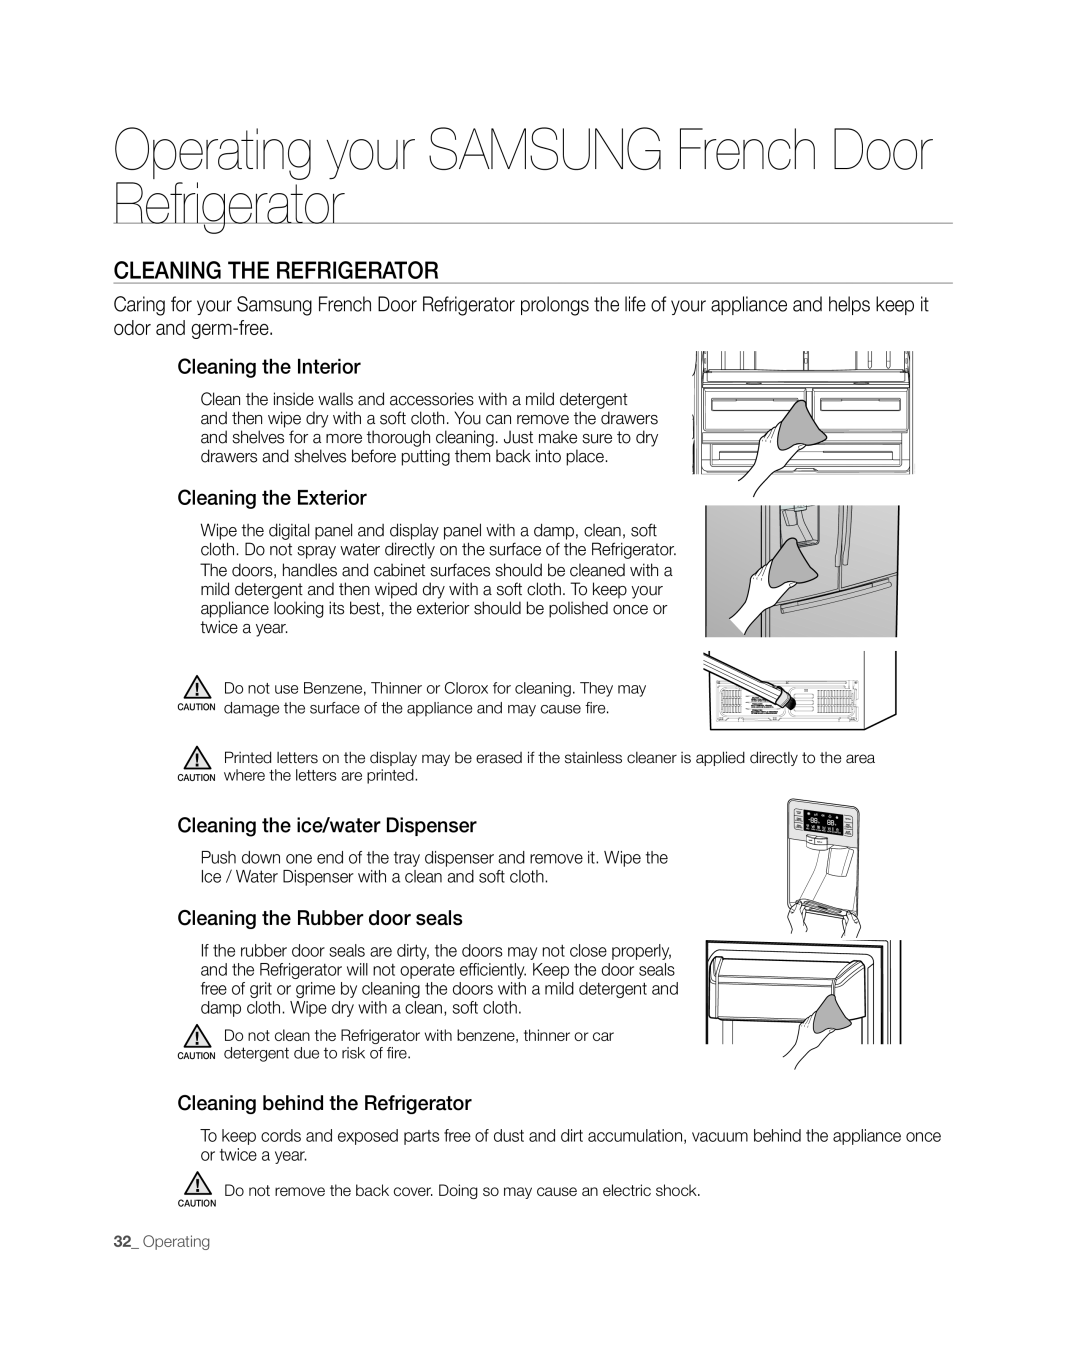 Samsung RFG297AAWP CLEAninG tHE REFRiGERAtoR, Operating your SAMSUNG French Door Refrigerator, Cleaning the Interior 